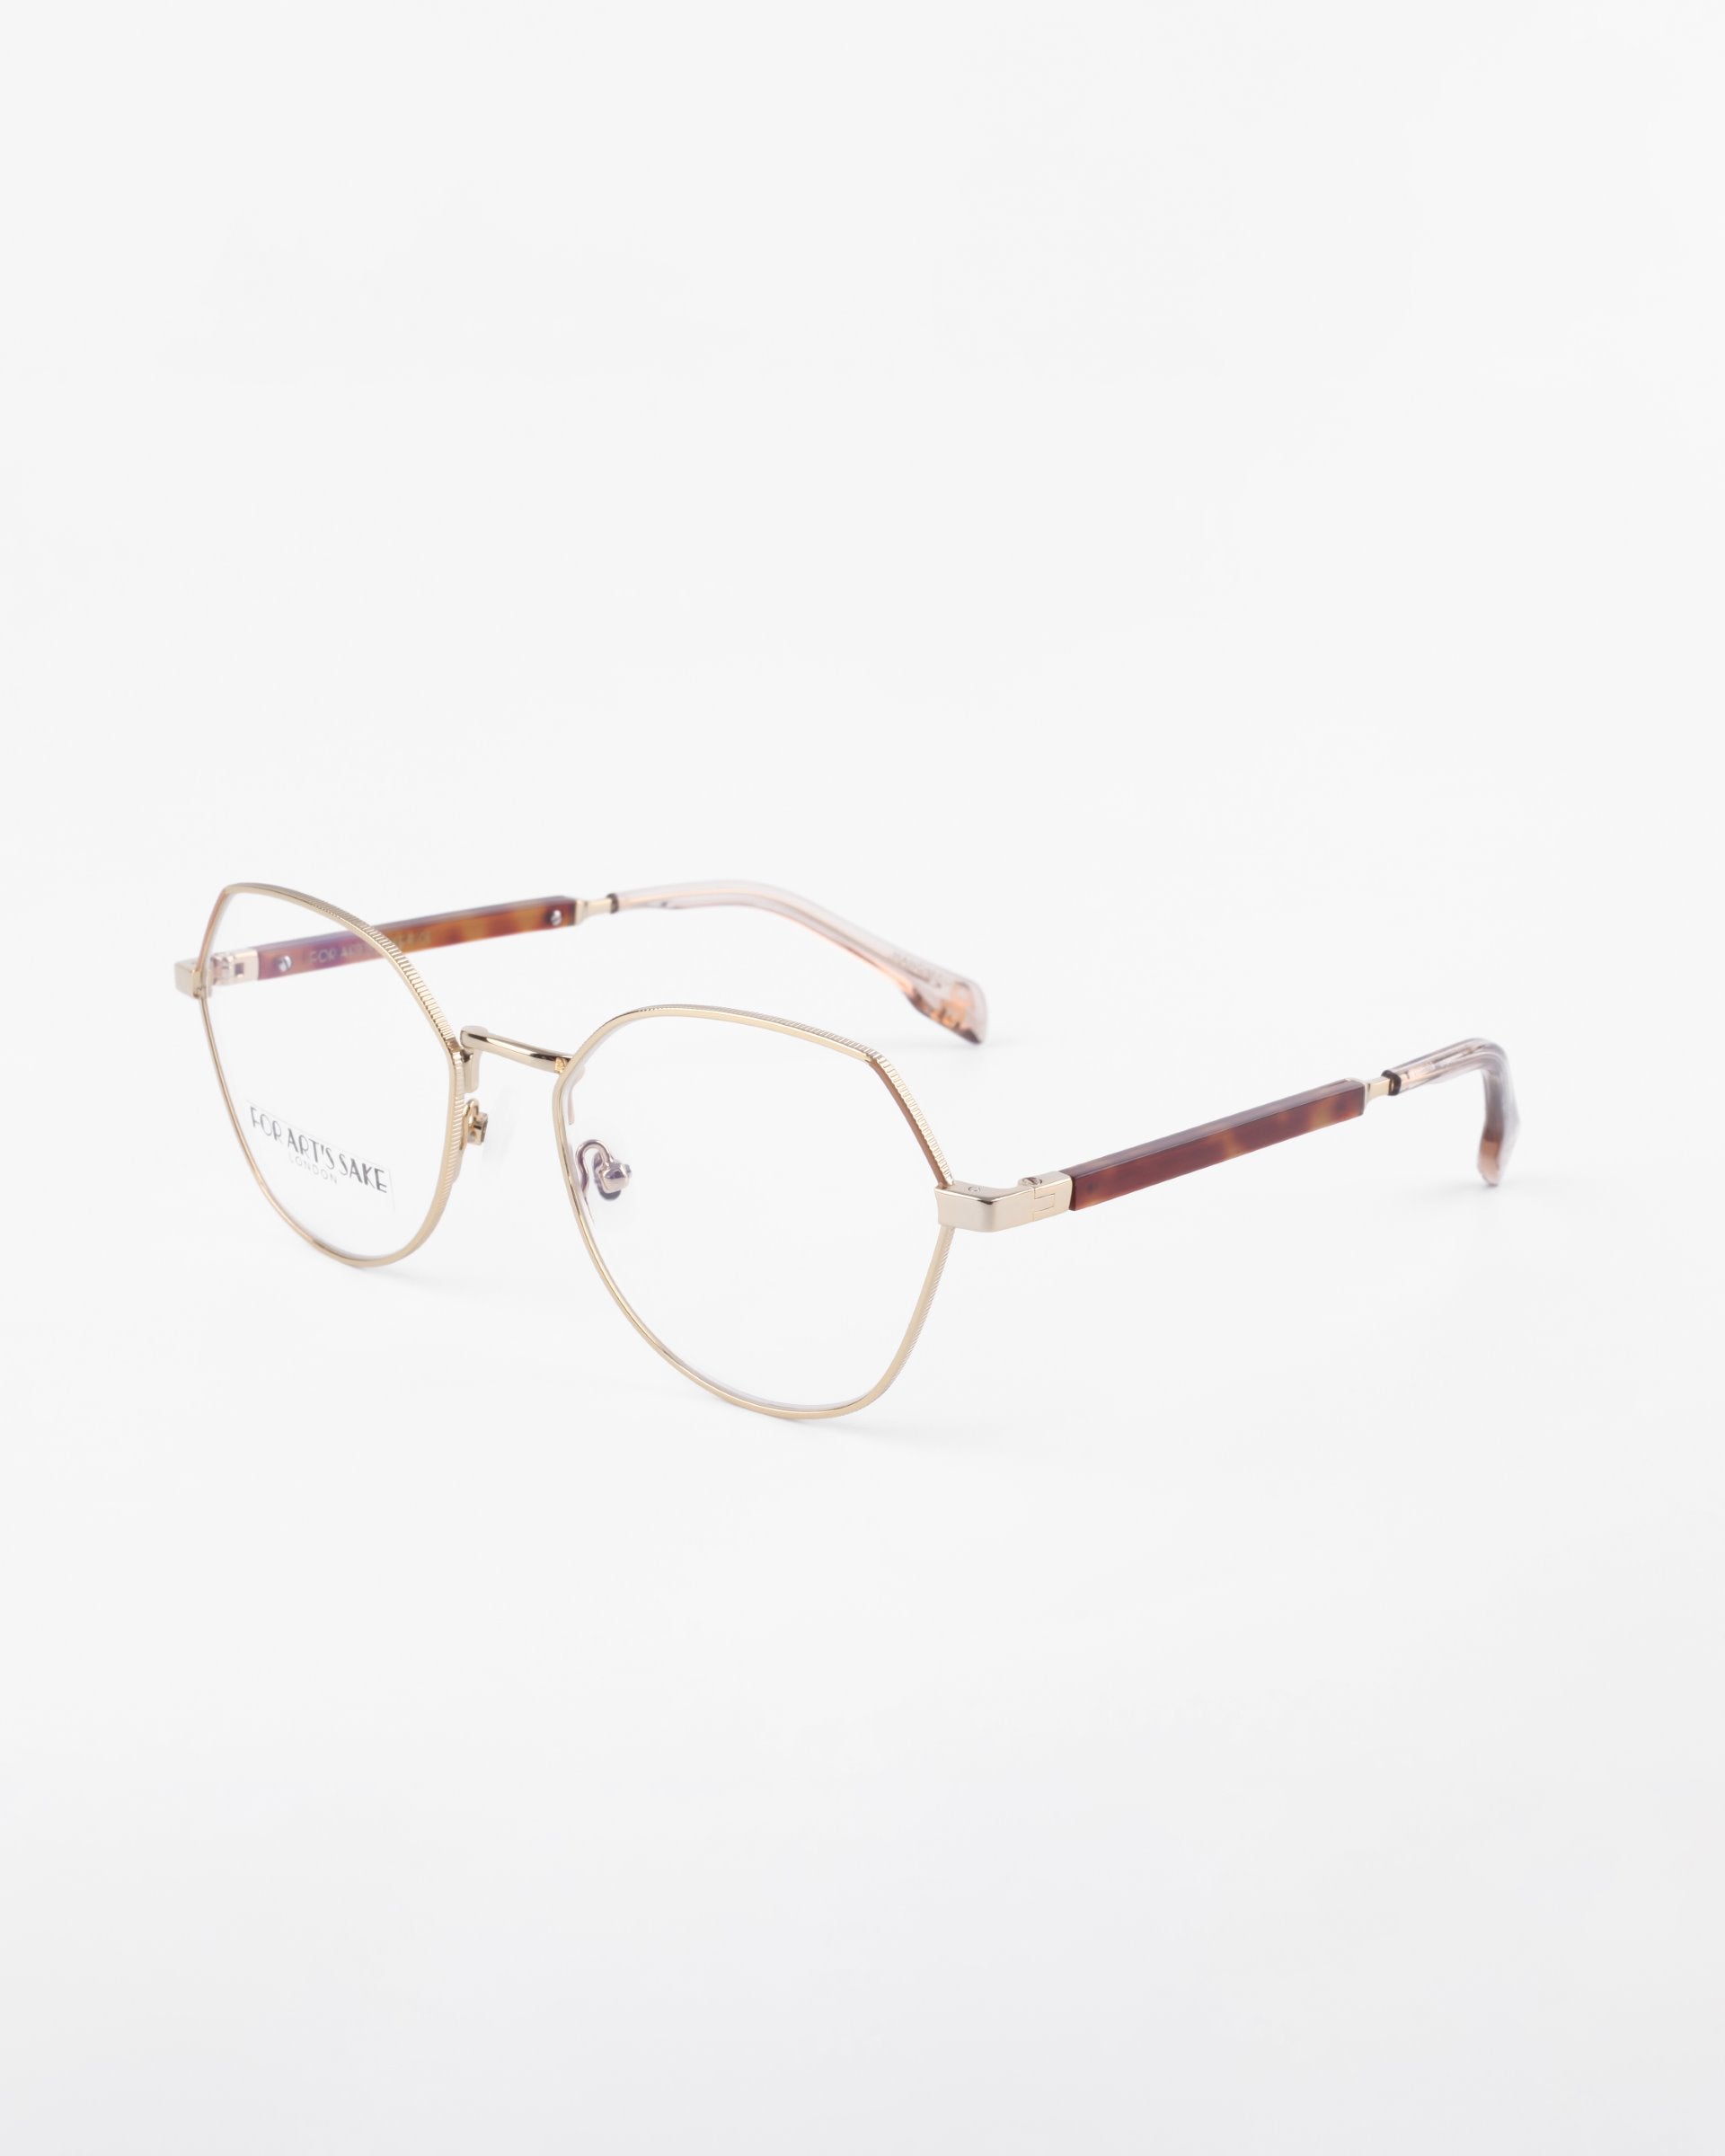 A pair of Orchard eyeglasses by For Art's Sake® featuring thin, 18-karat gold-plated metal frames. The temples are partly brown with a slightly translucent finish at the ends. The nose pads are clear, and the glasses are set against a white background.